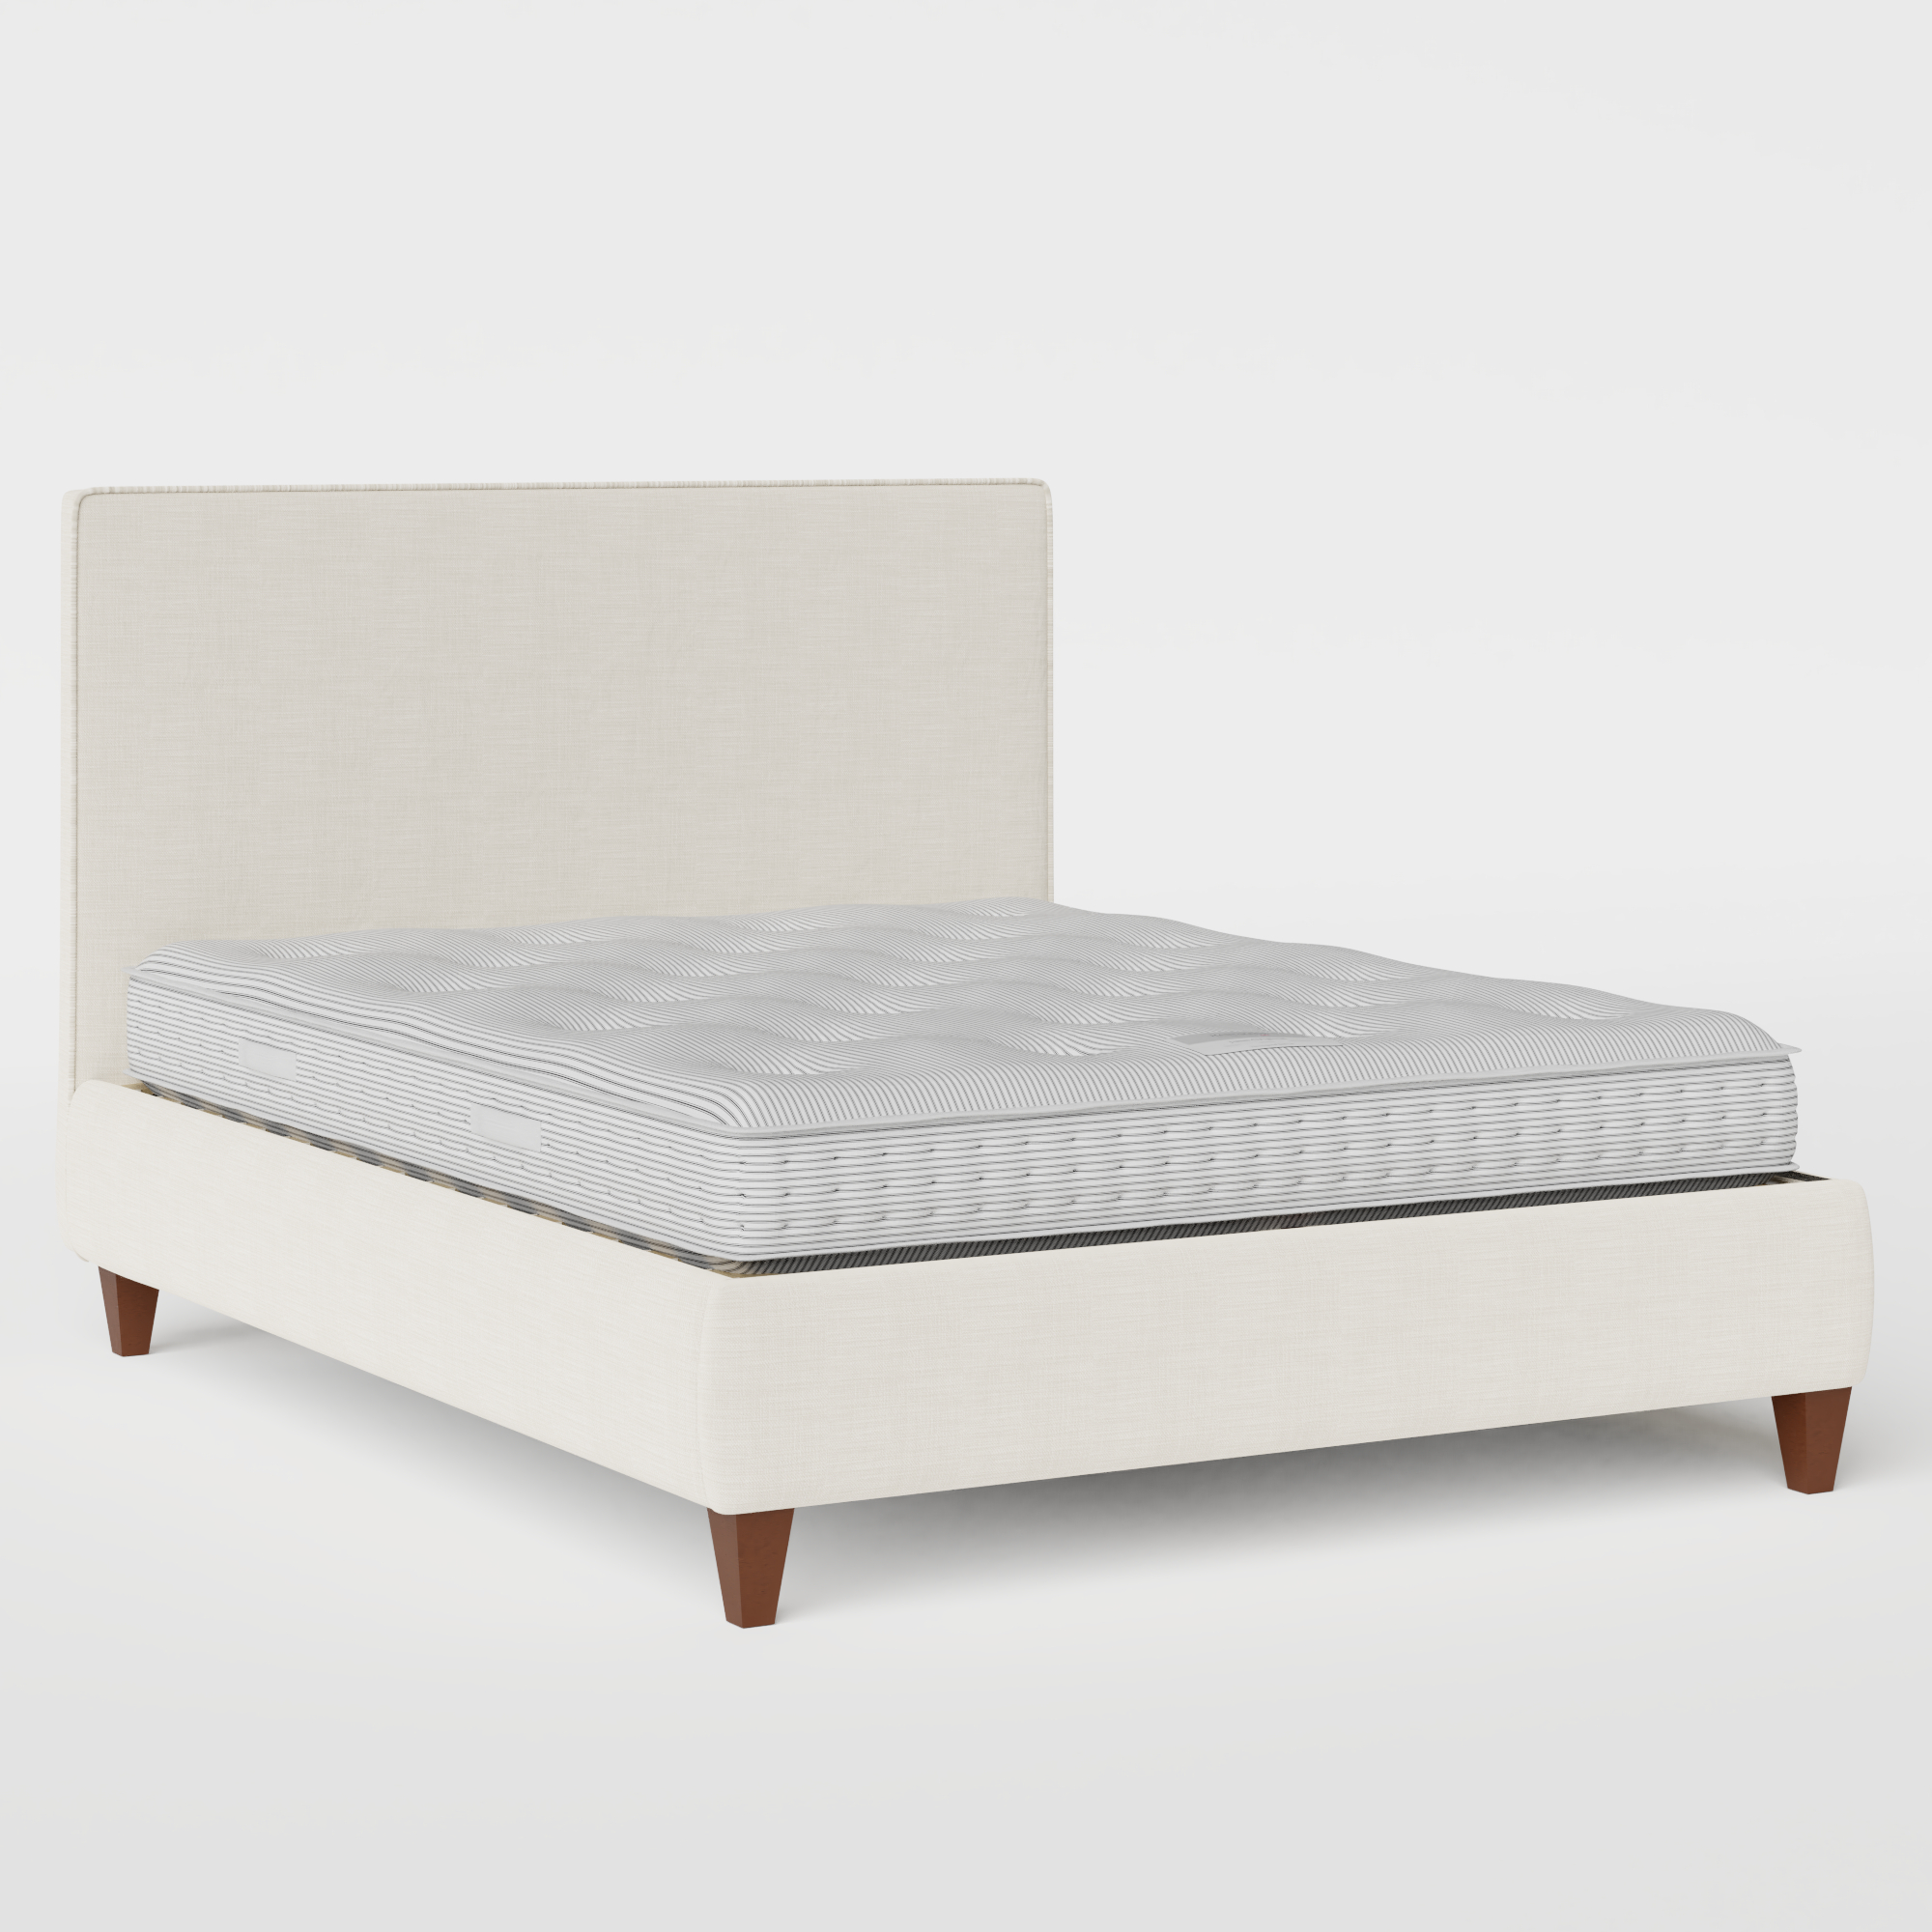 Yushan with Piping upholstered bed in mist fabric